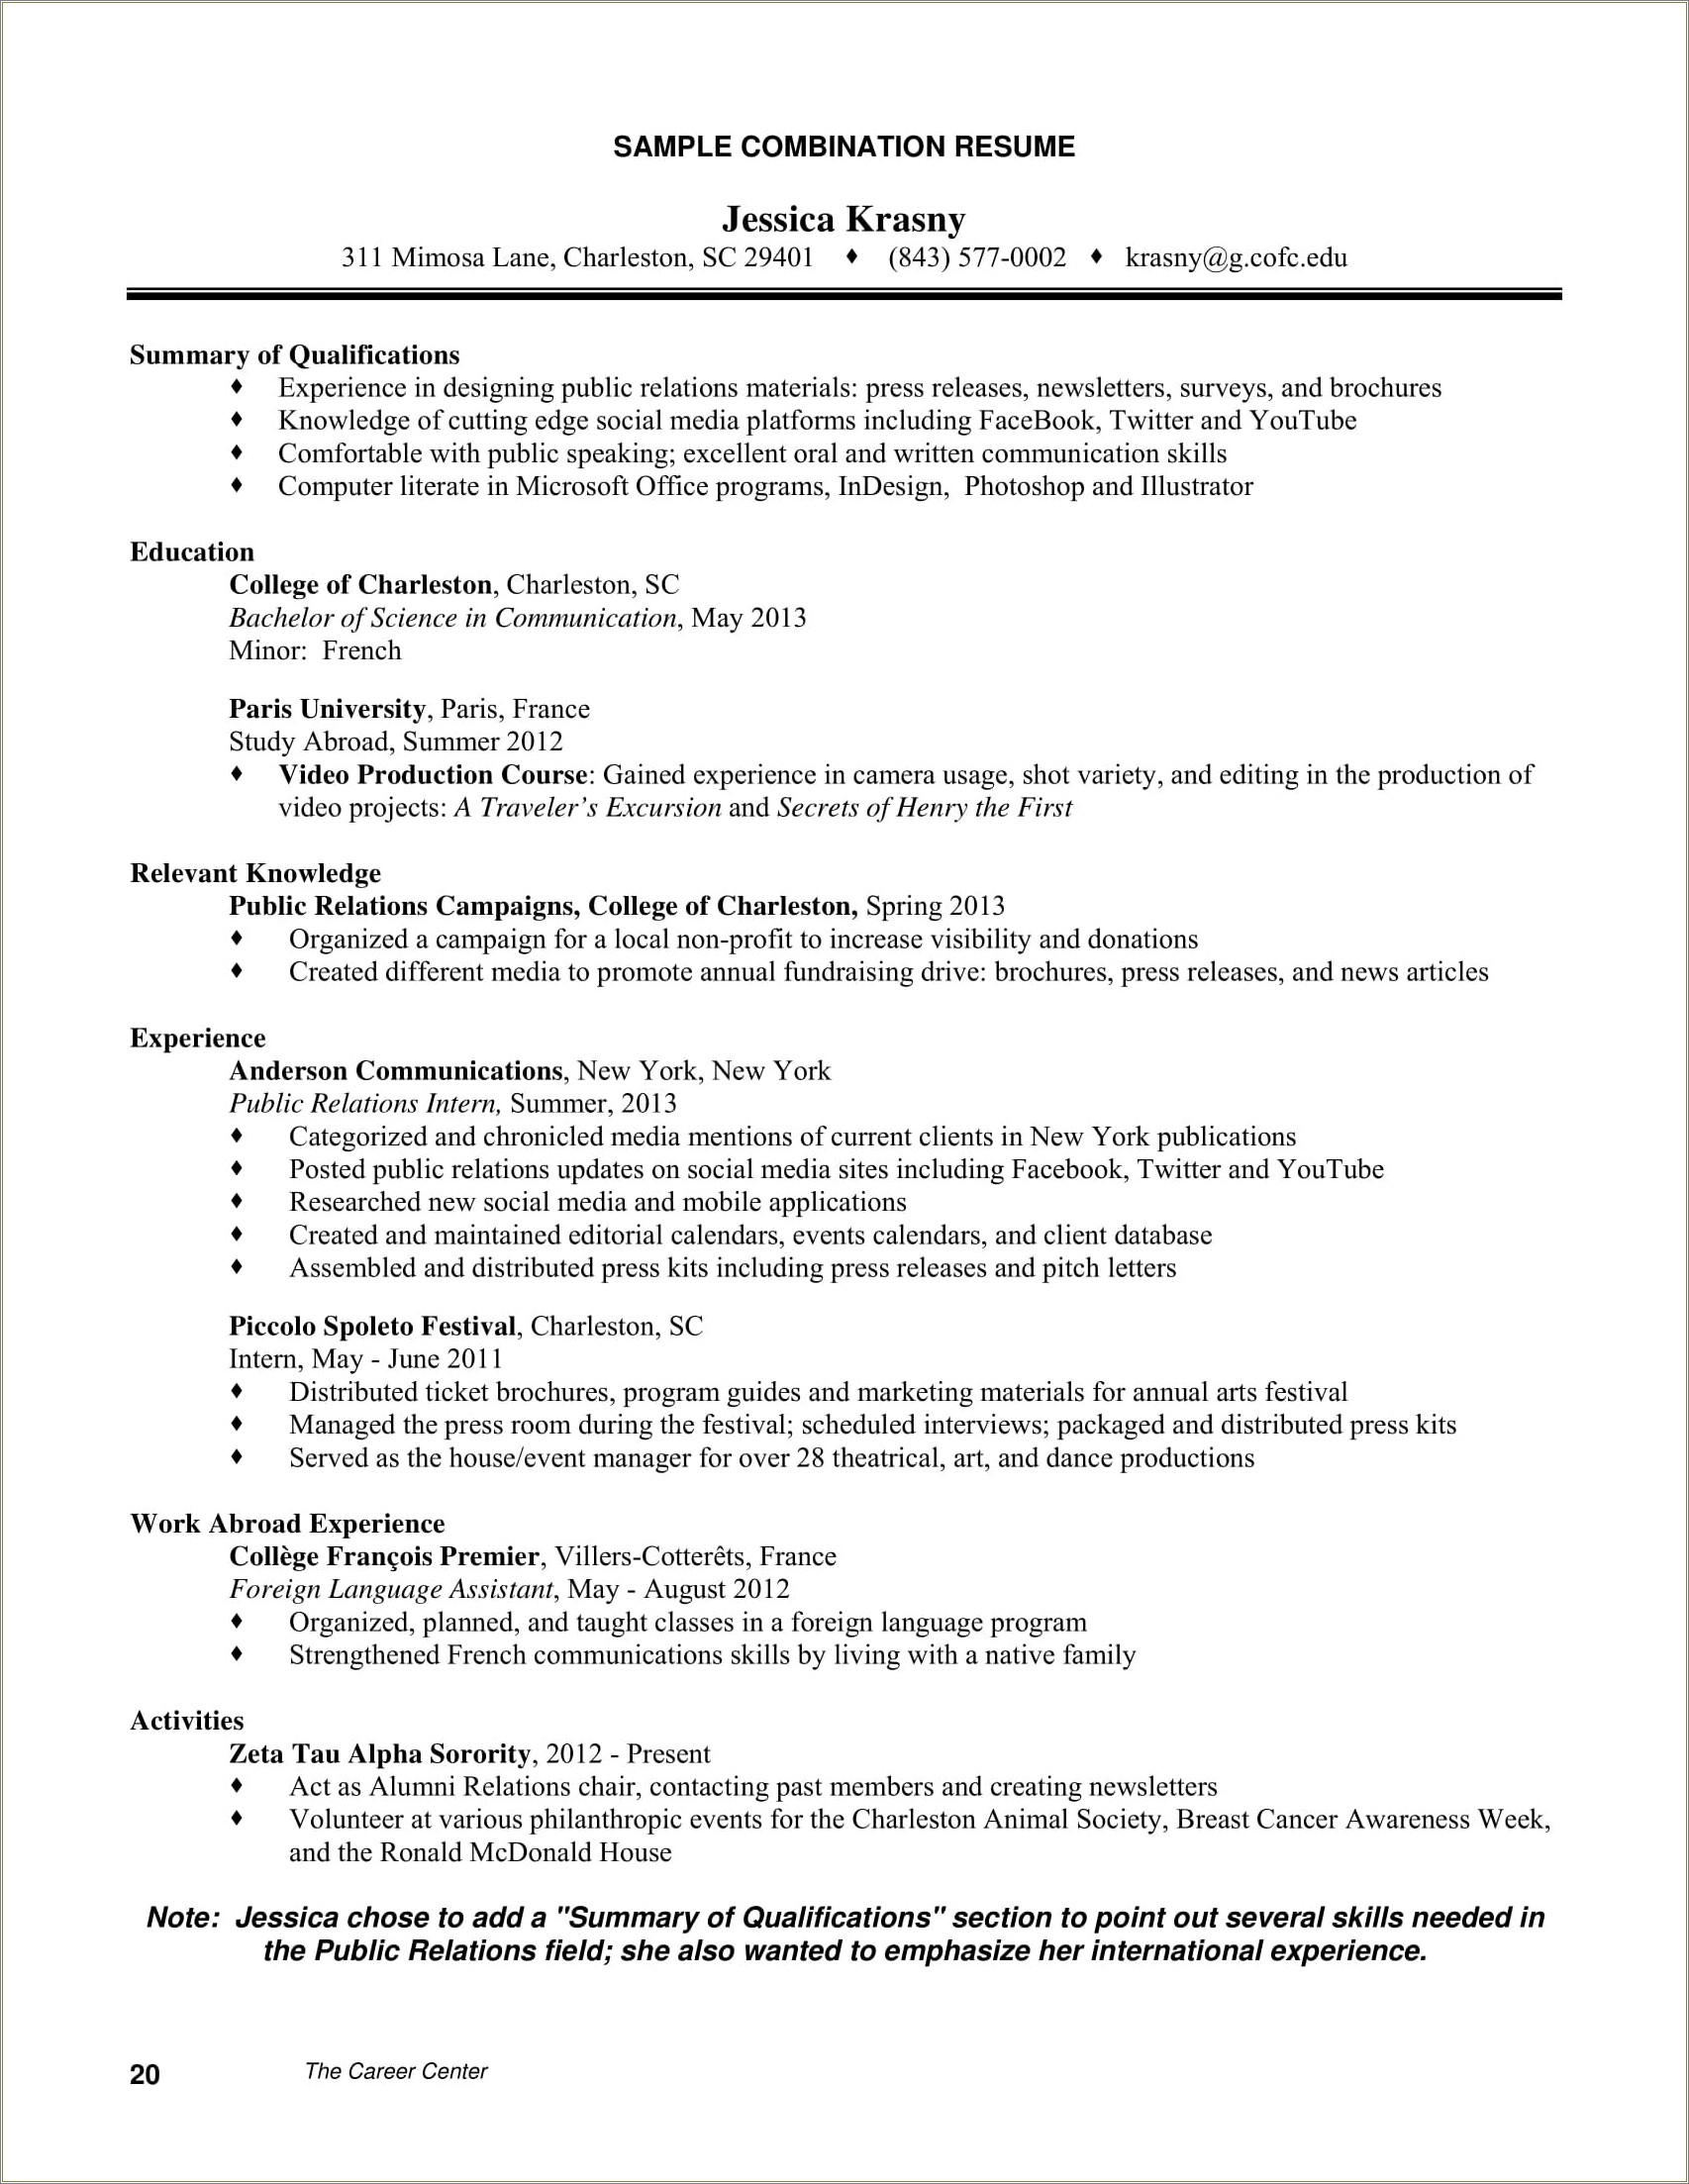 Is A Professional Summary On Resume Necessary